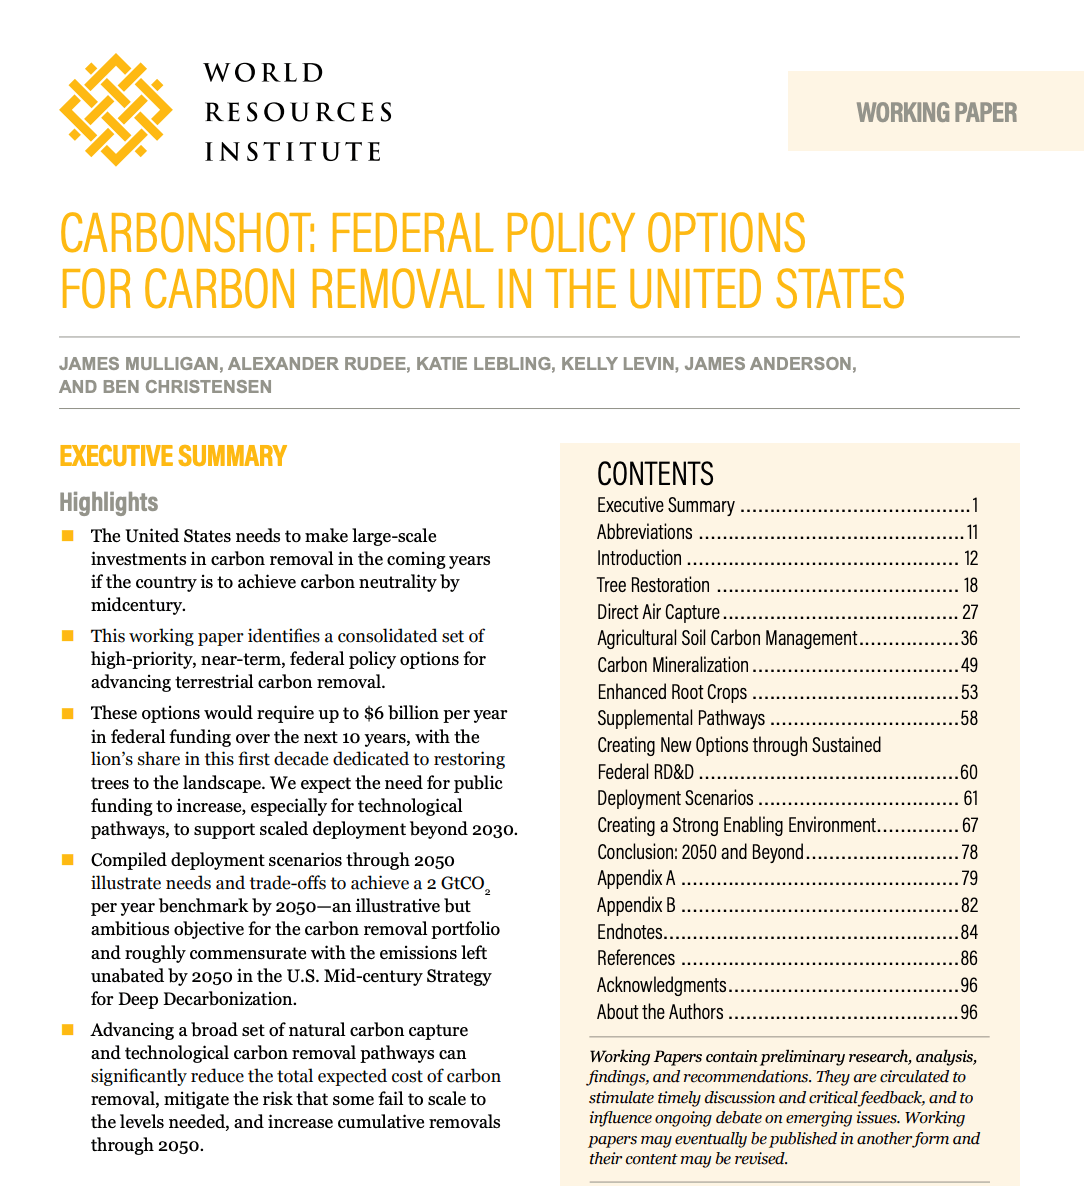 CarbonShot: Federal Policy Options for Carbon Removal in the United States